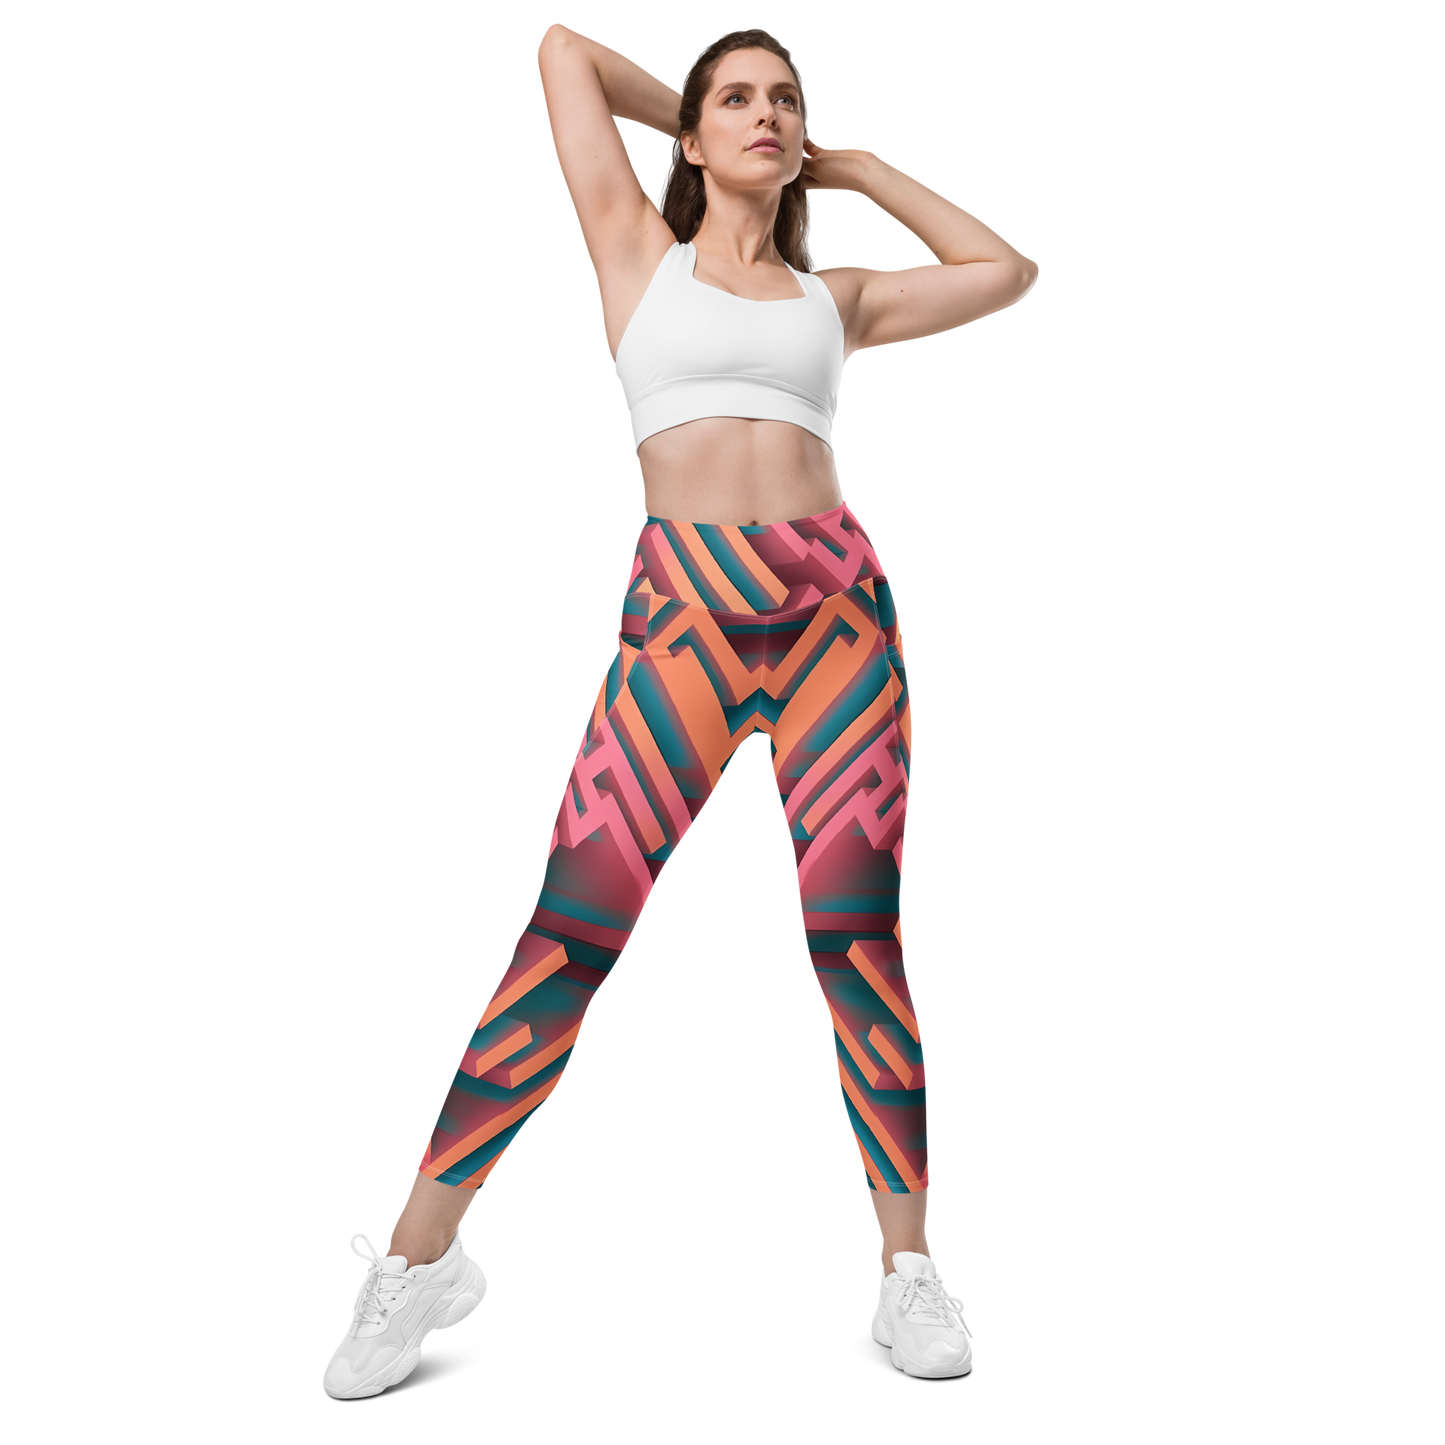 3D Maze Illusion | 3D Patterns | All-Over Print Leggings with Pockets - #1